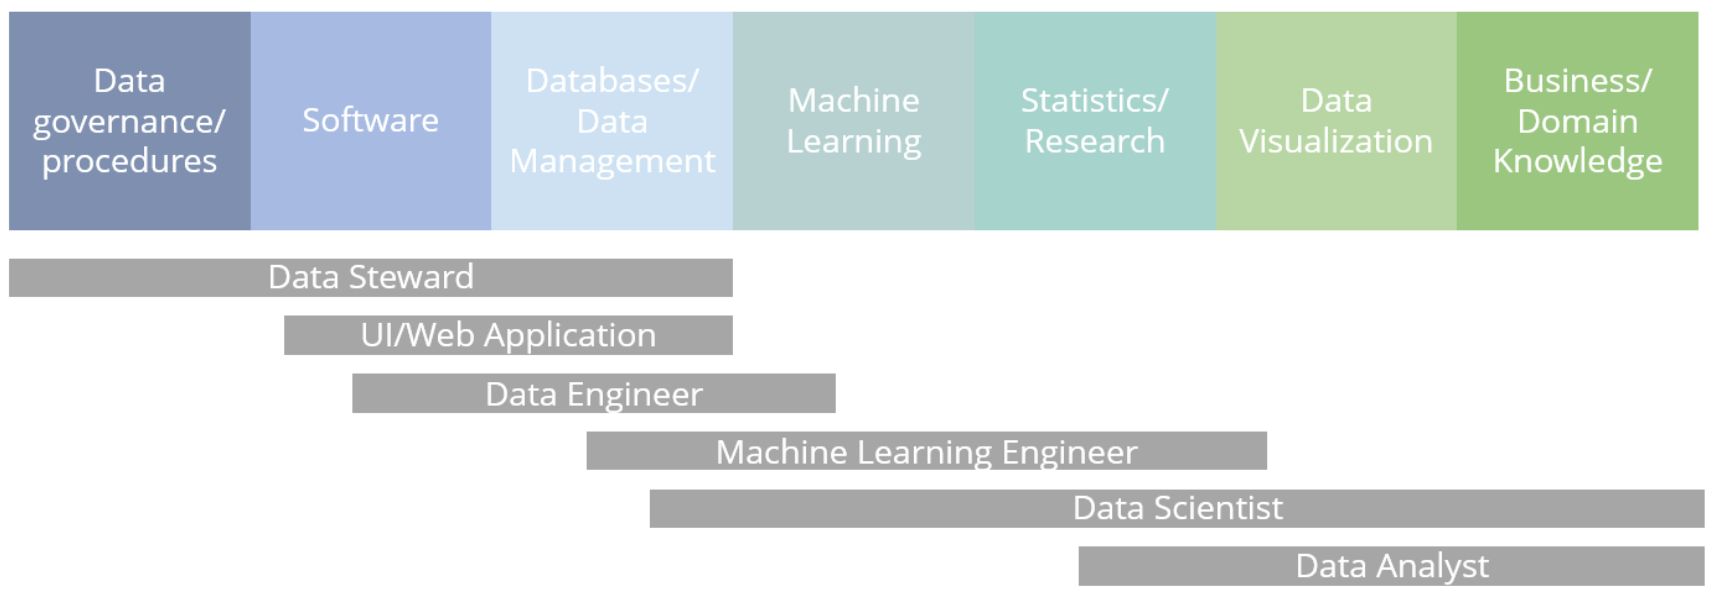 data_science_roles